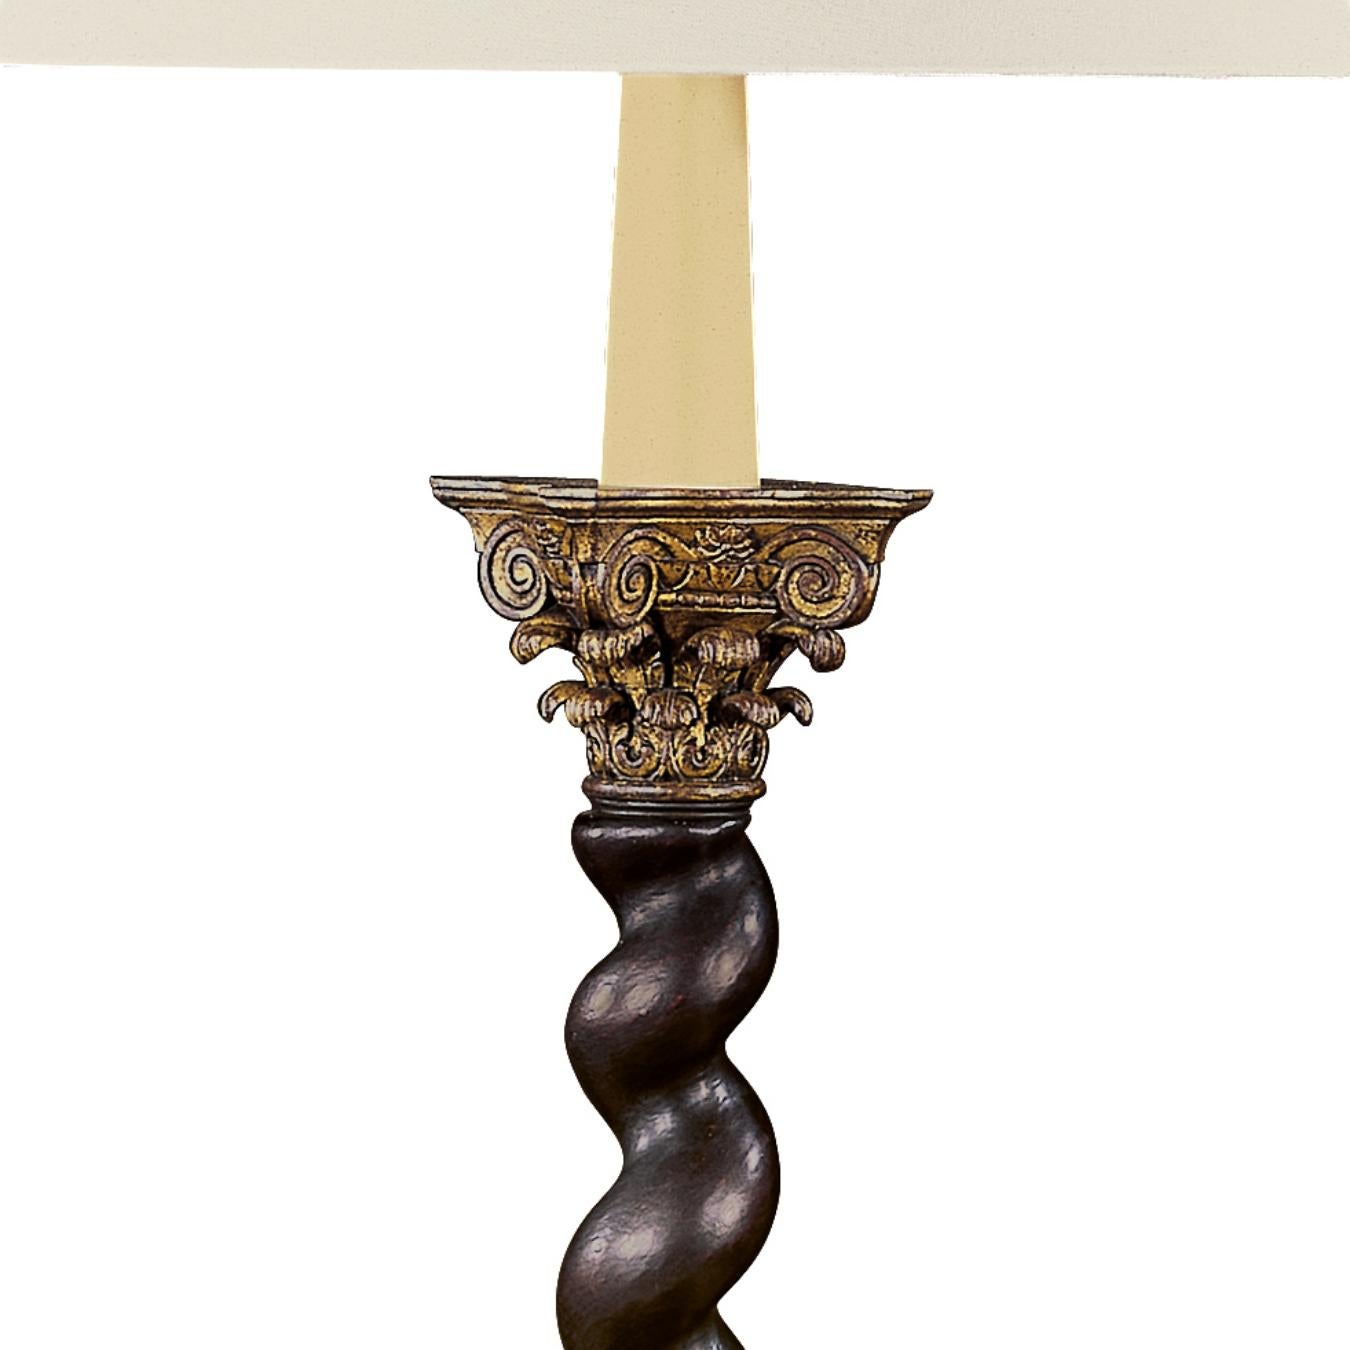 Mexican Salomonic Twist Lamp Inspired by Columns with Twisted Shaft & Corinthian Capital For Sale